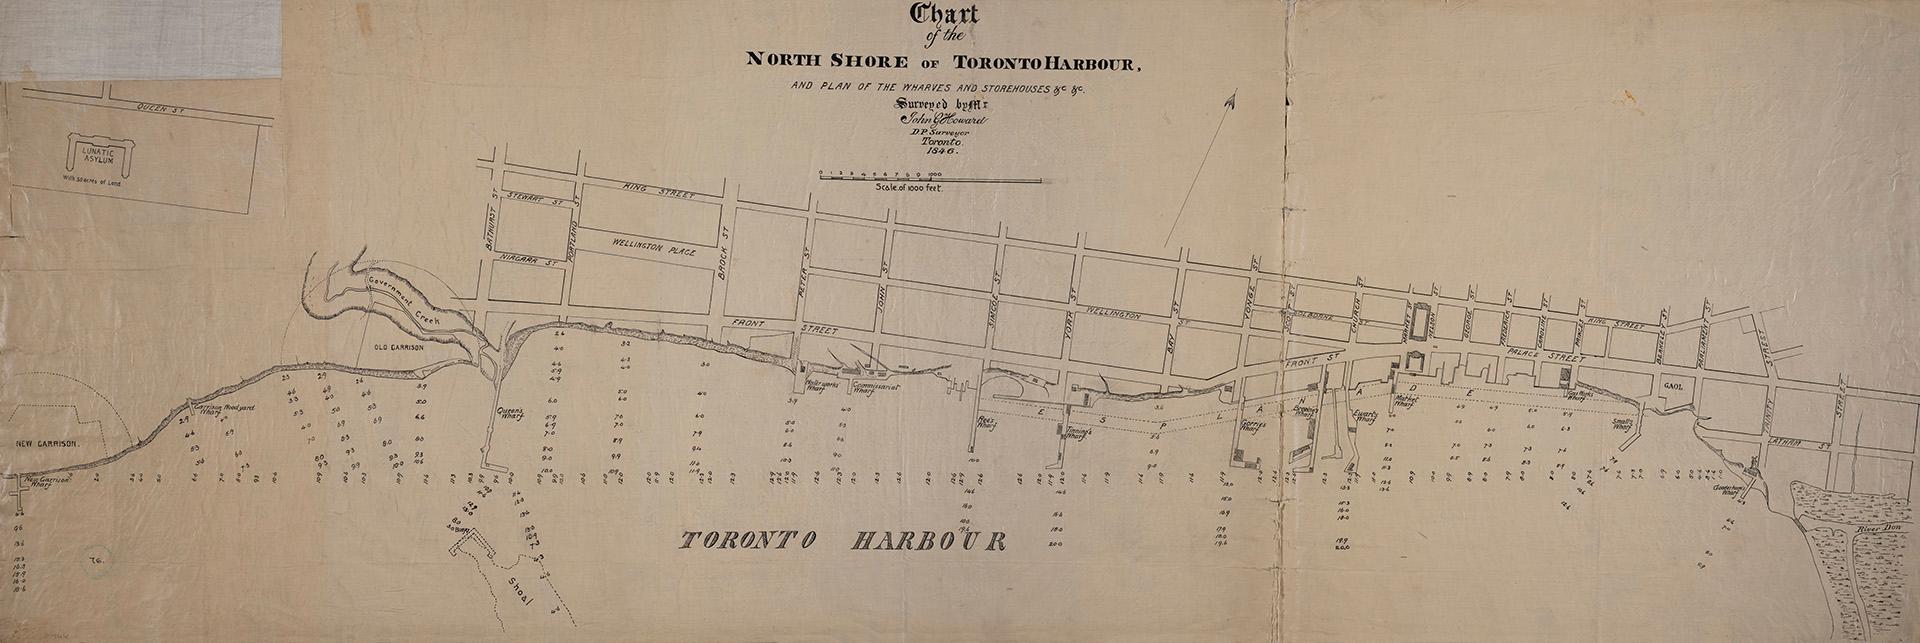 1846 map of the north shore of Toronto Harbour showing wharves and storehouses
